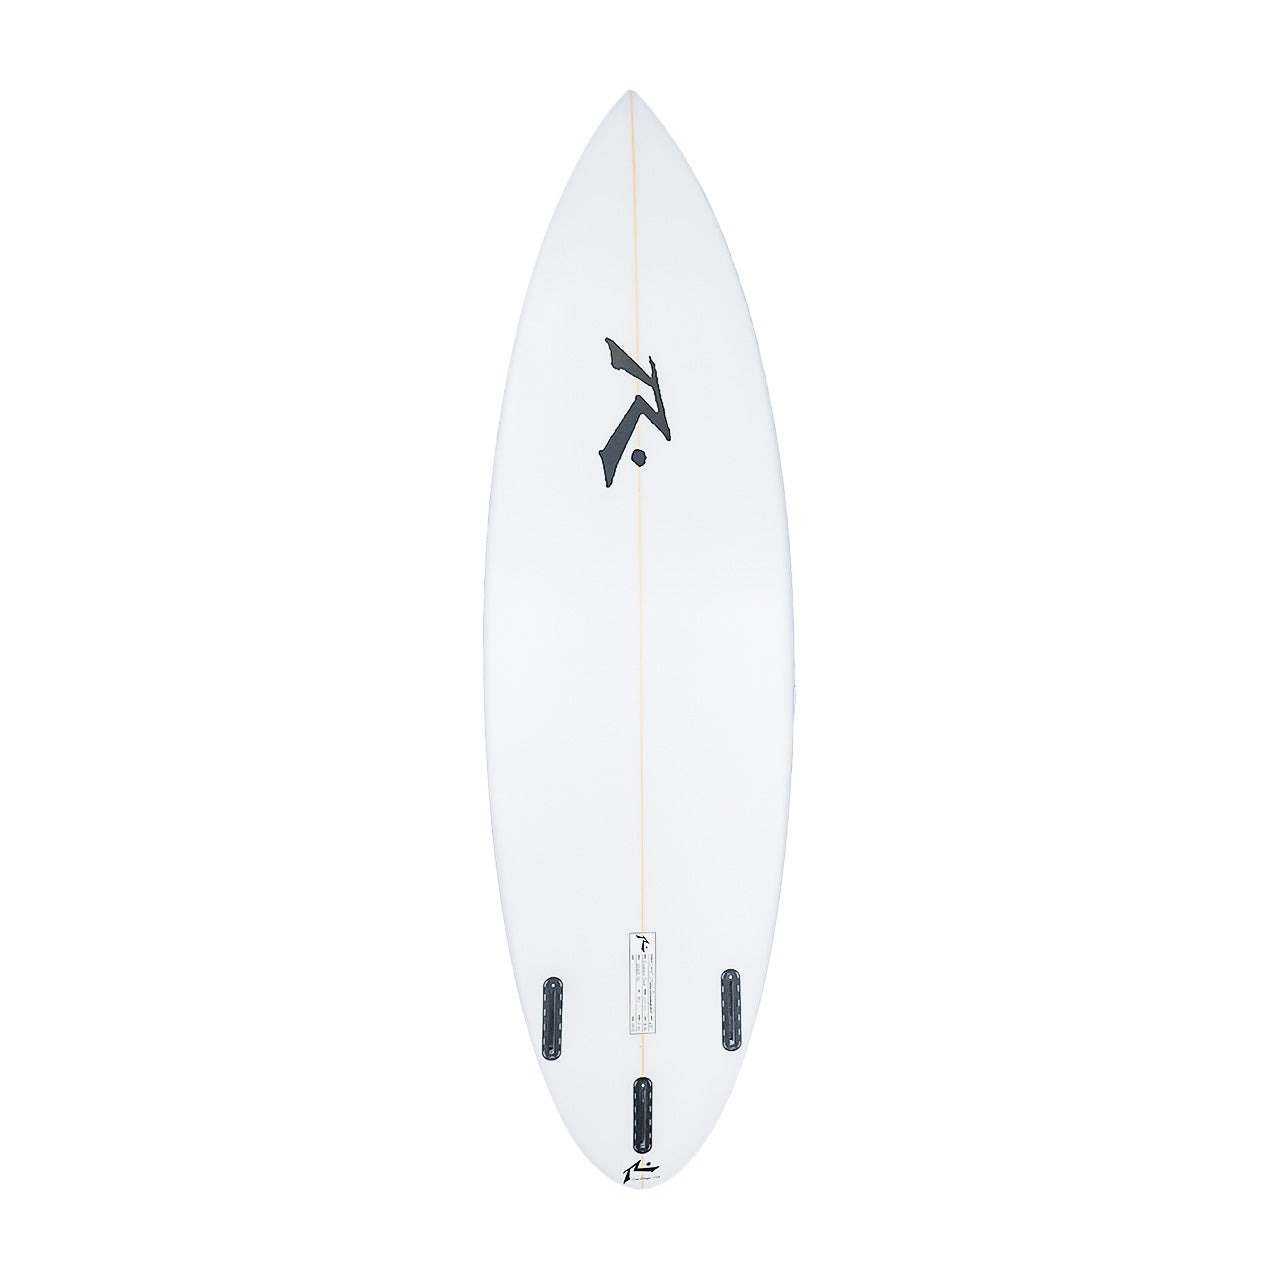 Enough Said High Performance Shortboard - In Stock - Deck View - Rusty Surfboards